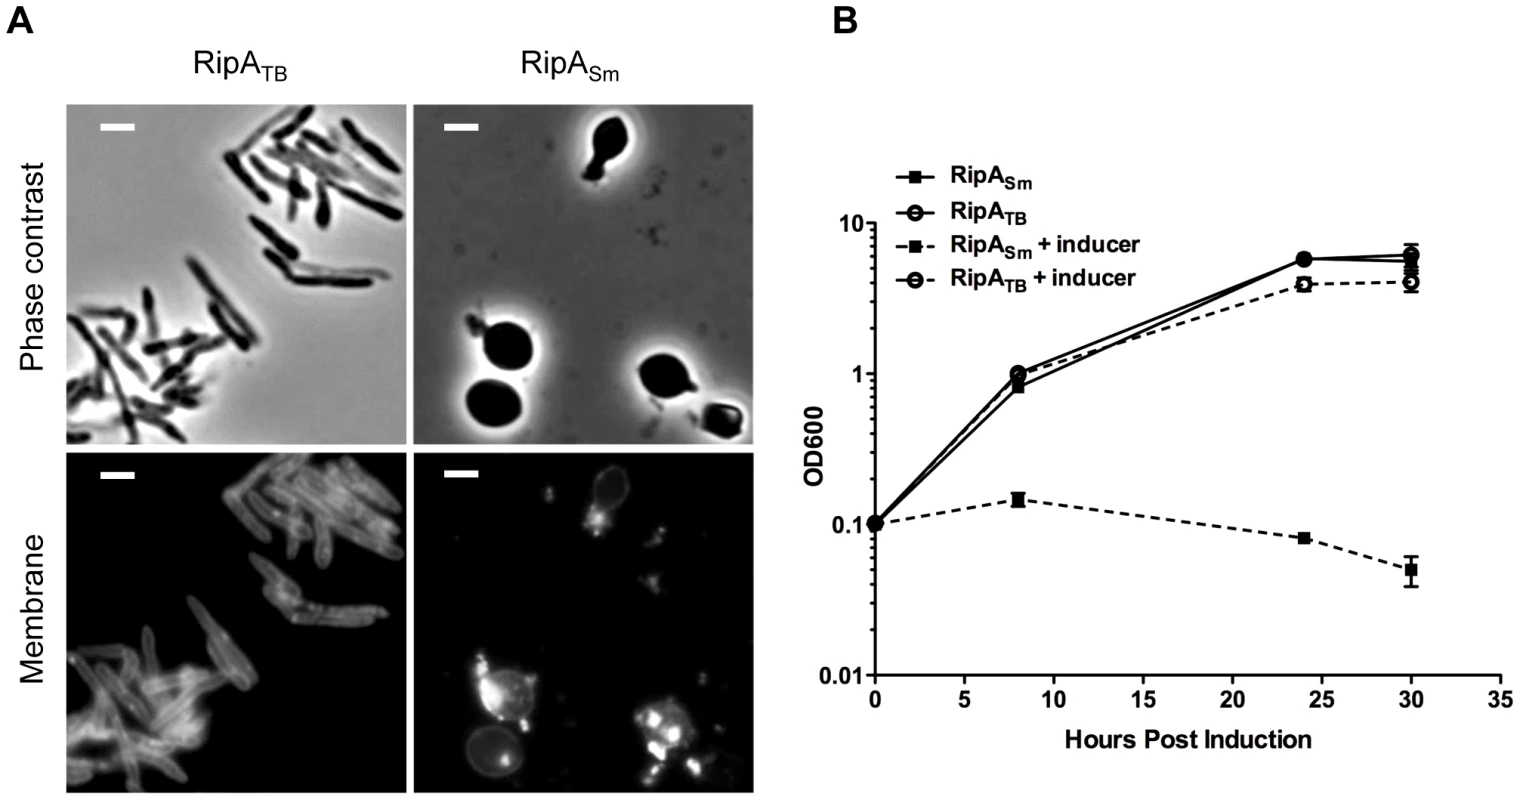 RipA is differentially active in a species-specific manner.